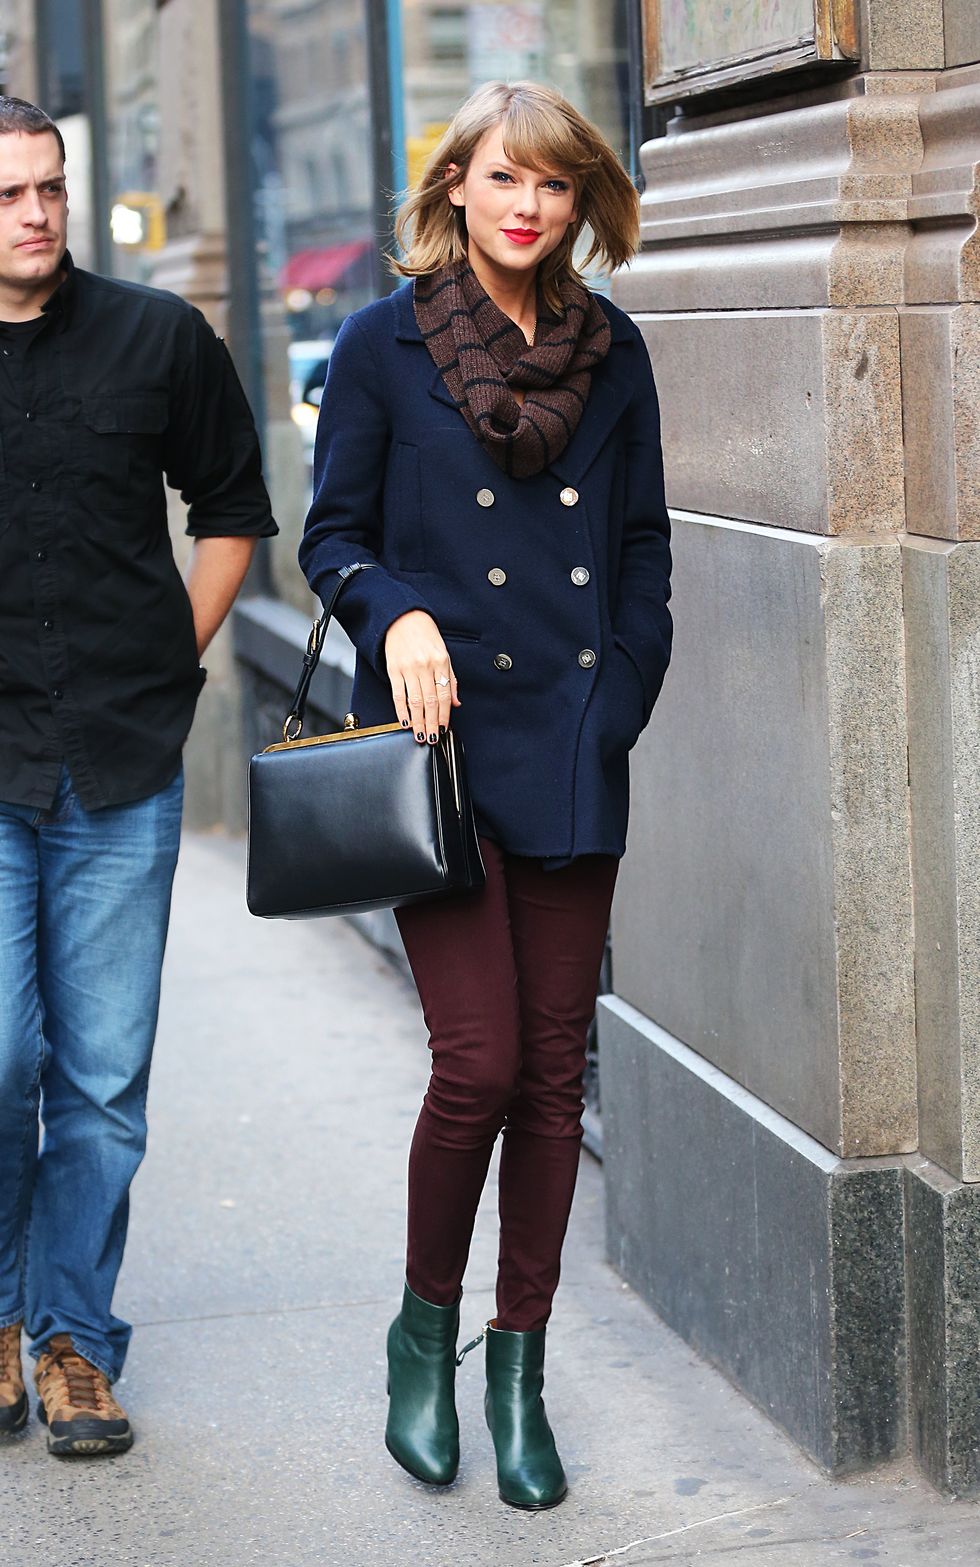 Taylor Swift wears a lovely navy blue coat while walking around in New York.